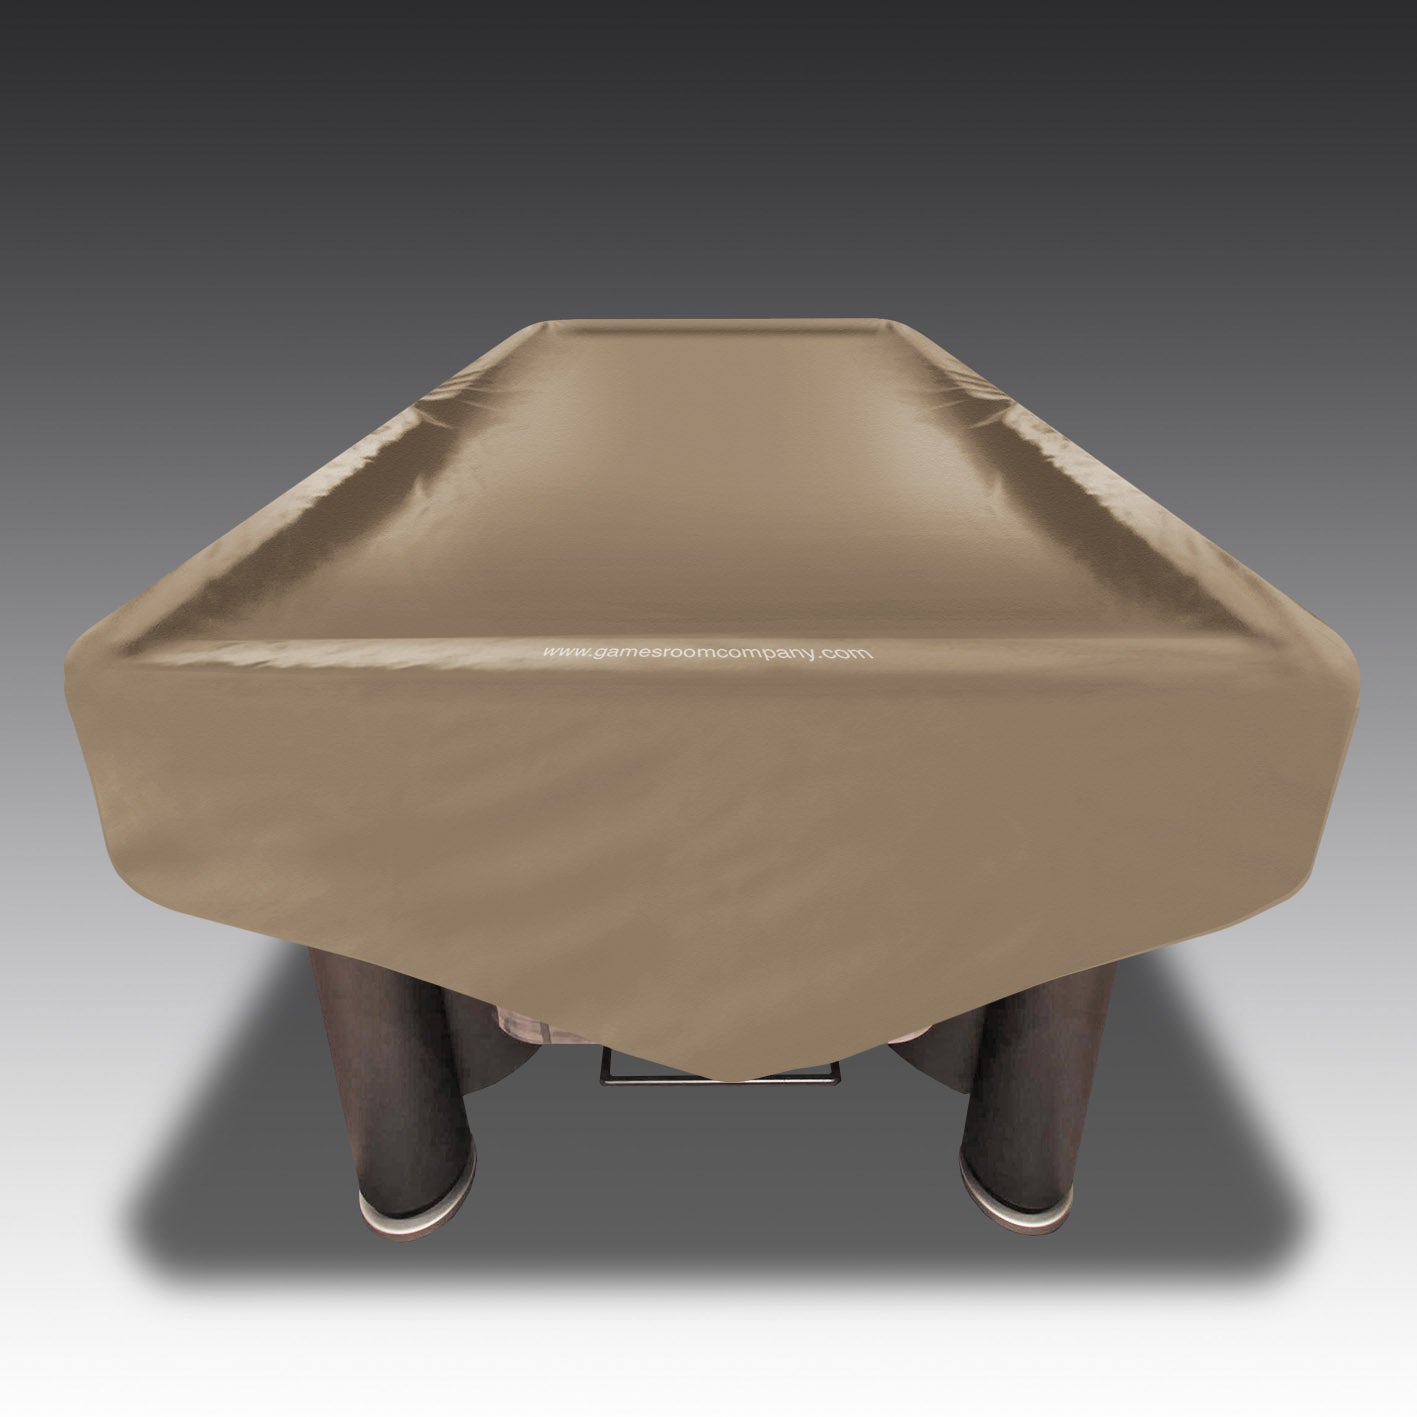 American Pool Table Cover